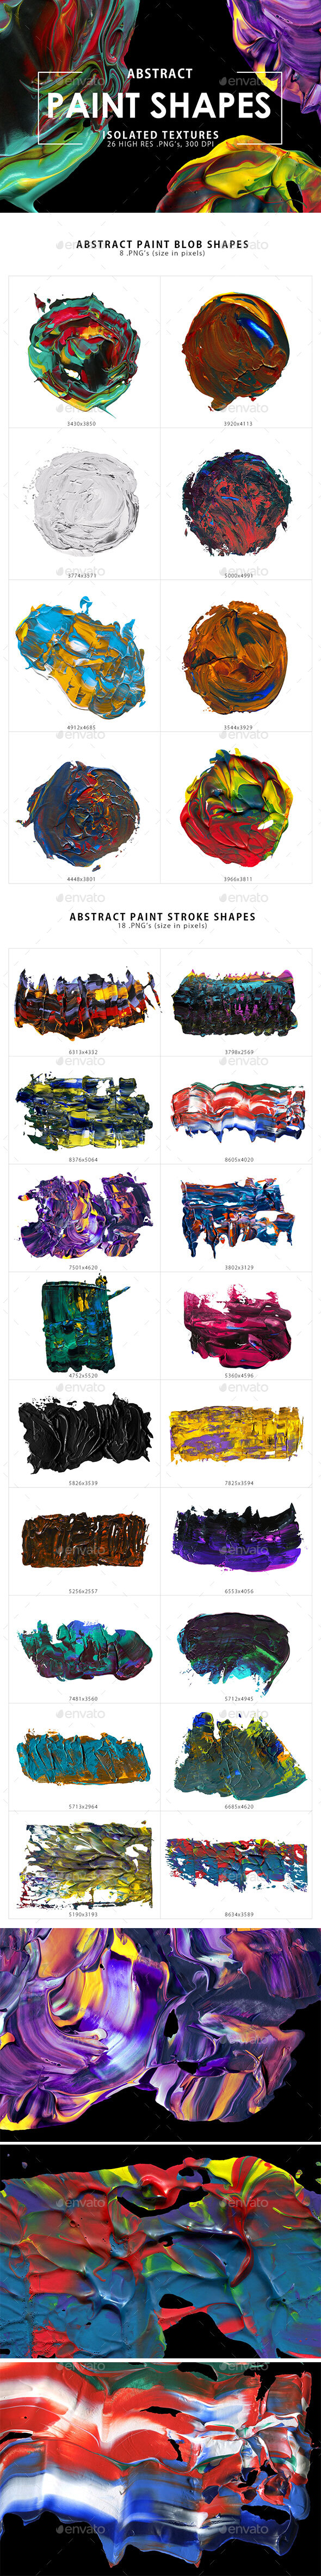 26 Abstract Paint Shapes